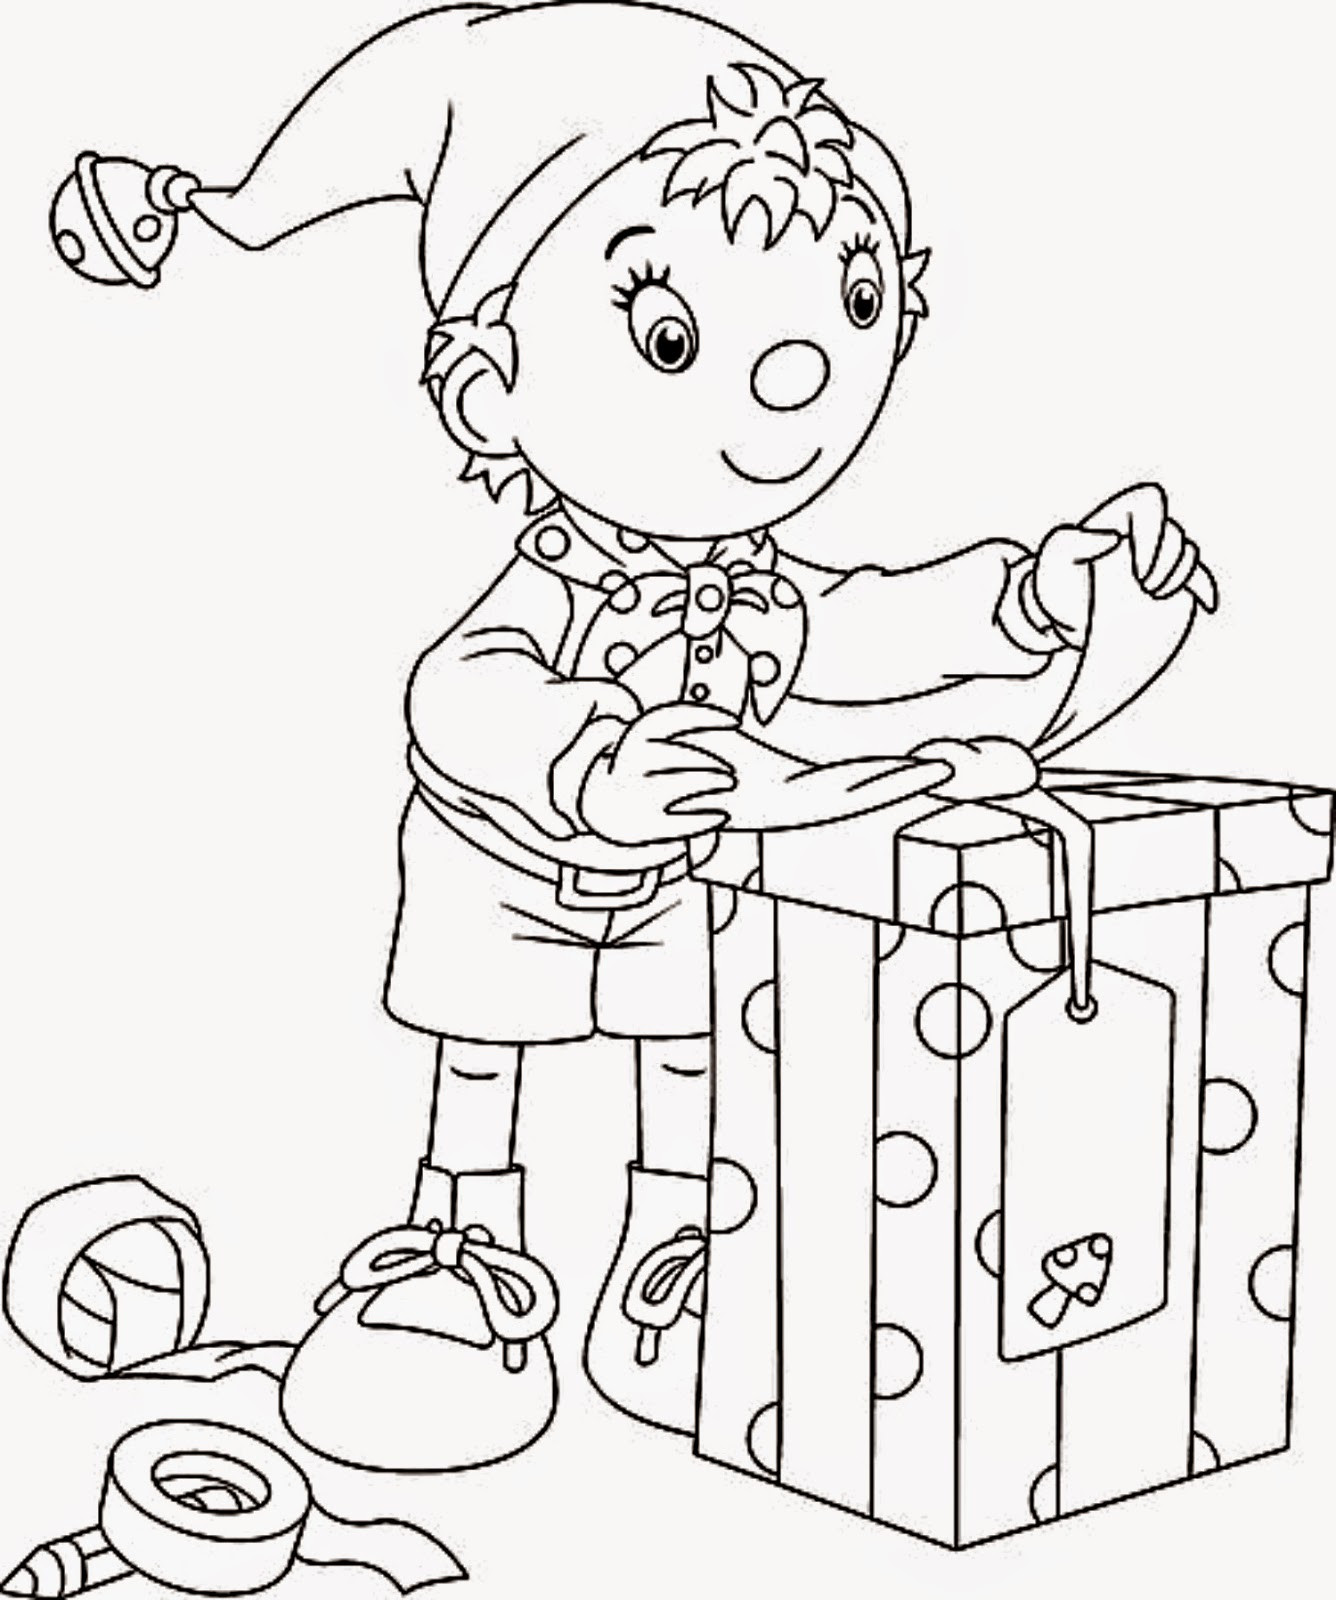 Elf Coloring Pages Printable
 Coloring Pages Christmas Elf Coloring Pages Free and